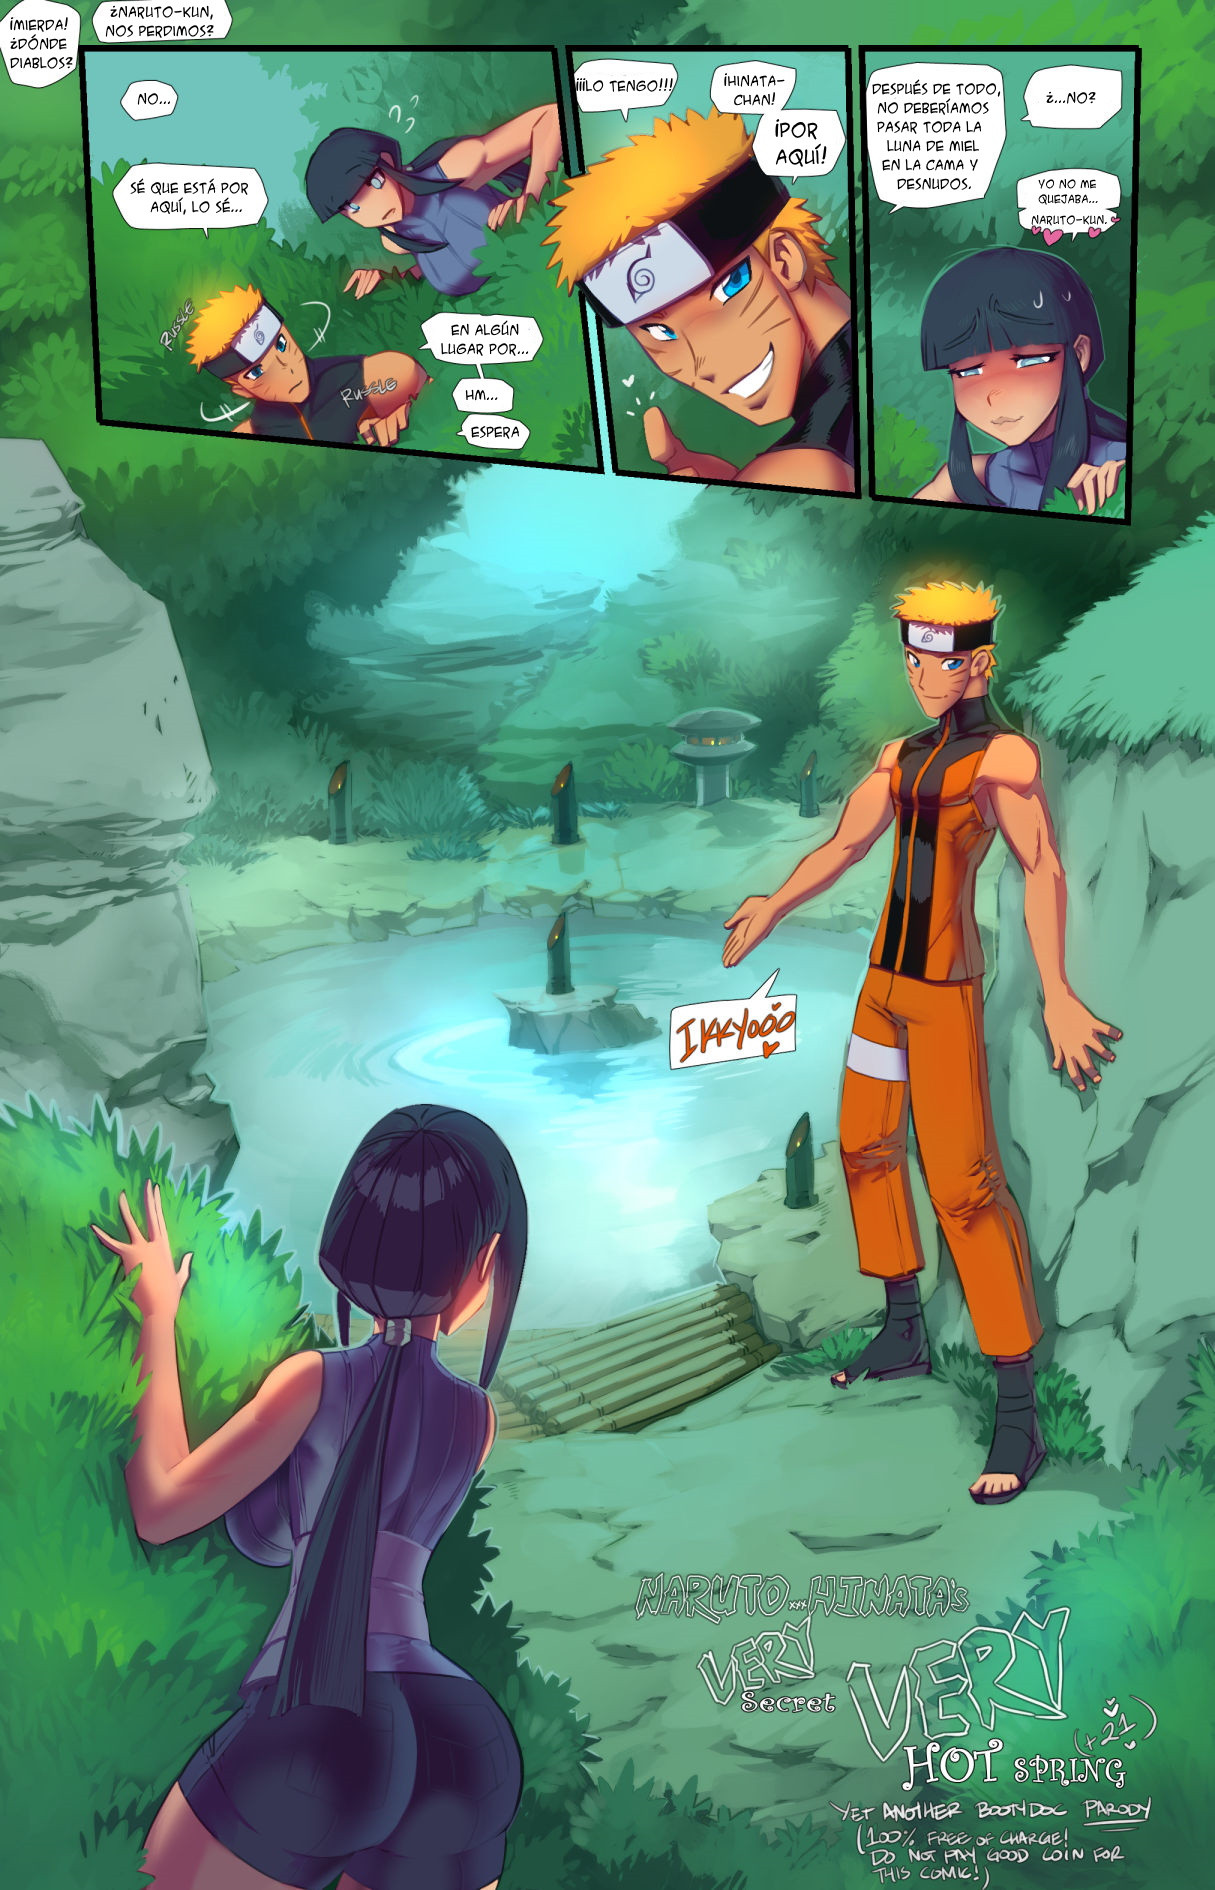 Naruto x Hinata very secret and very hot spring – Fred Perry - 1